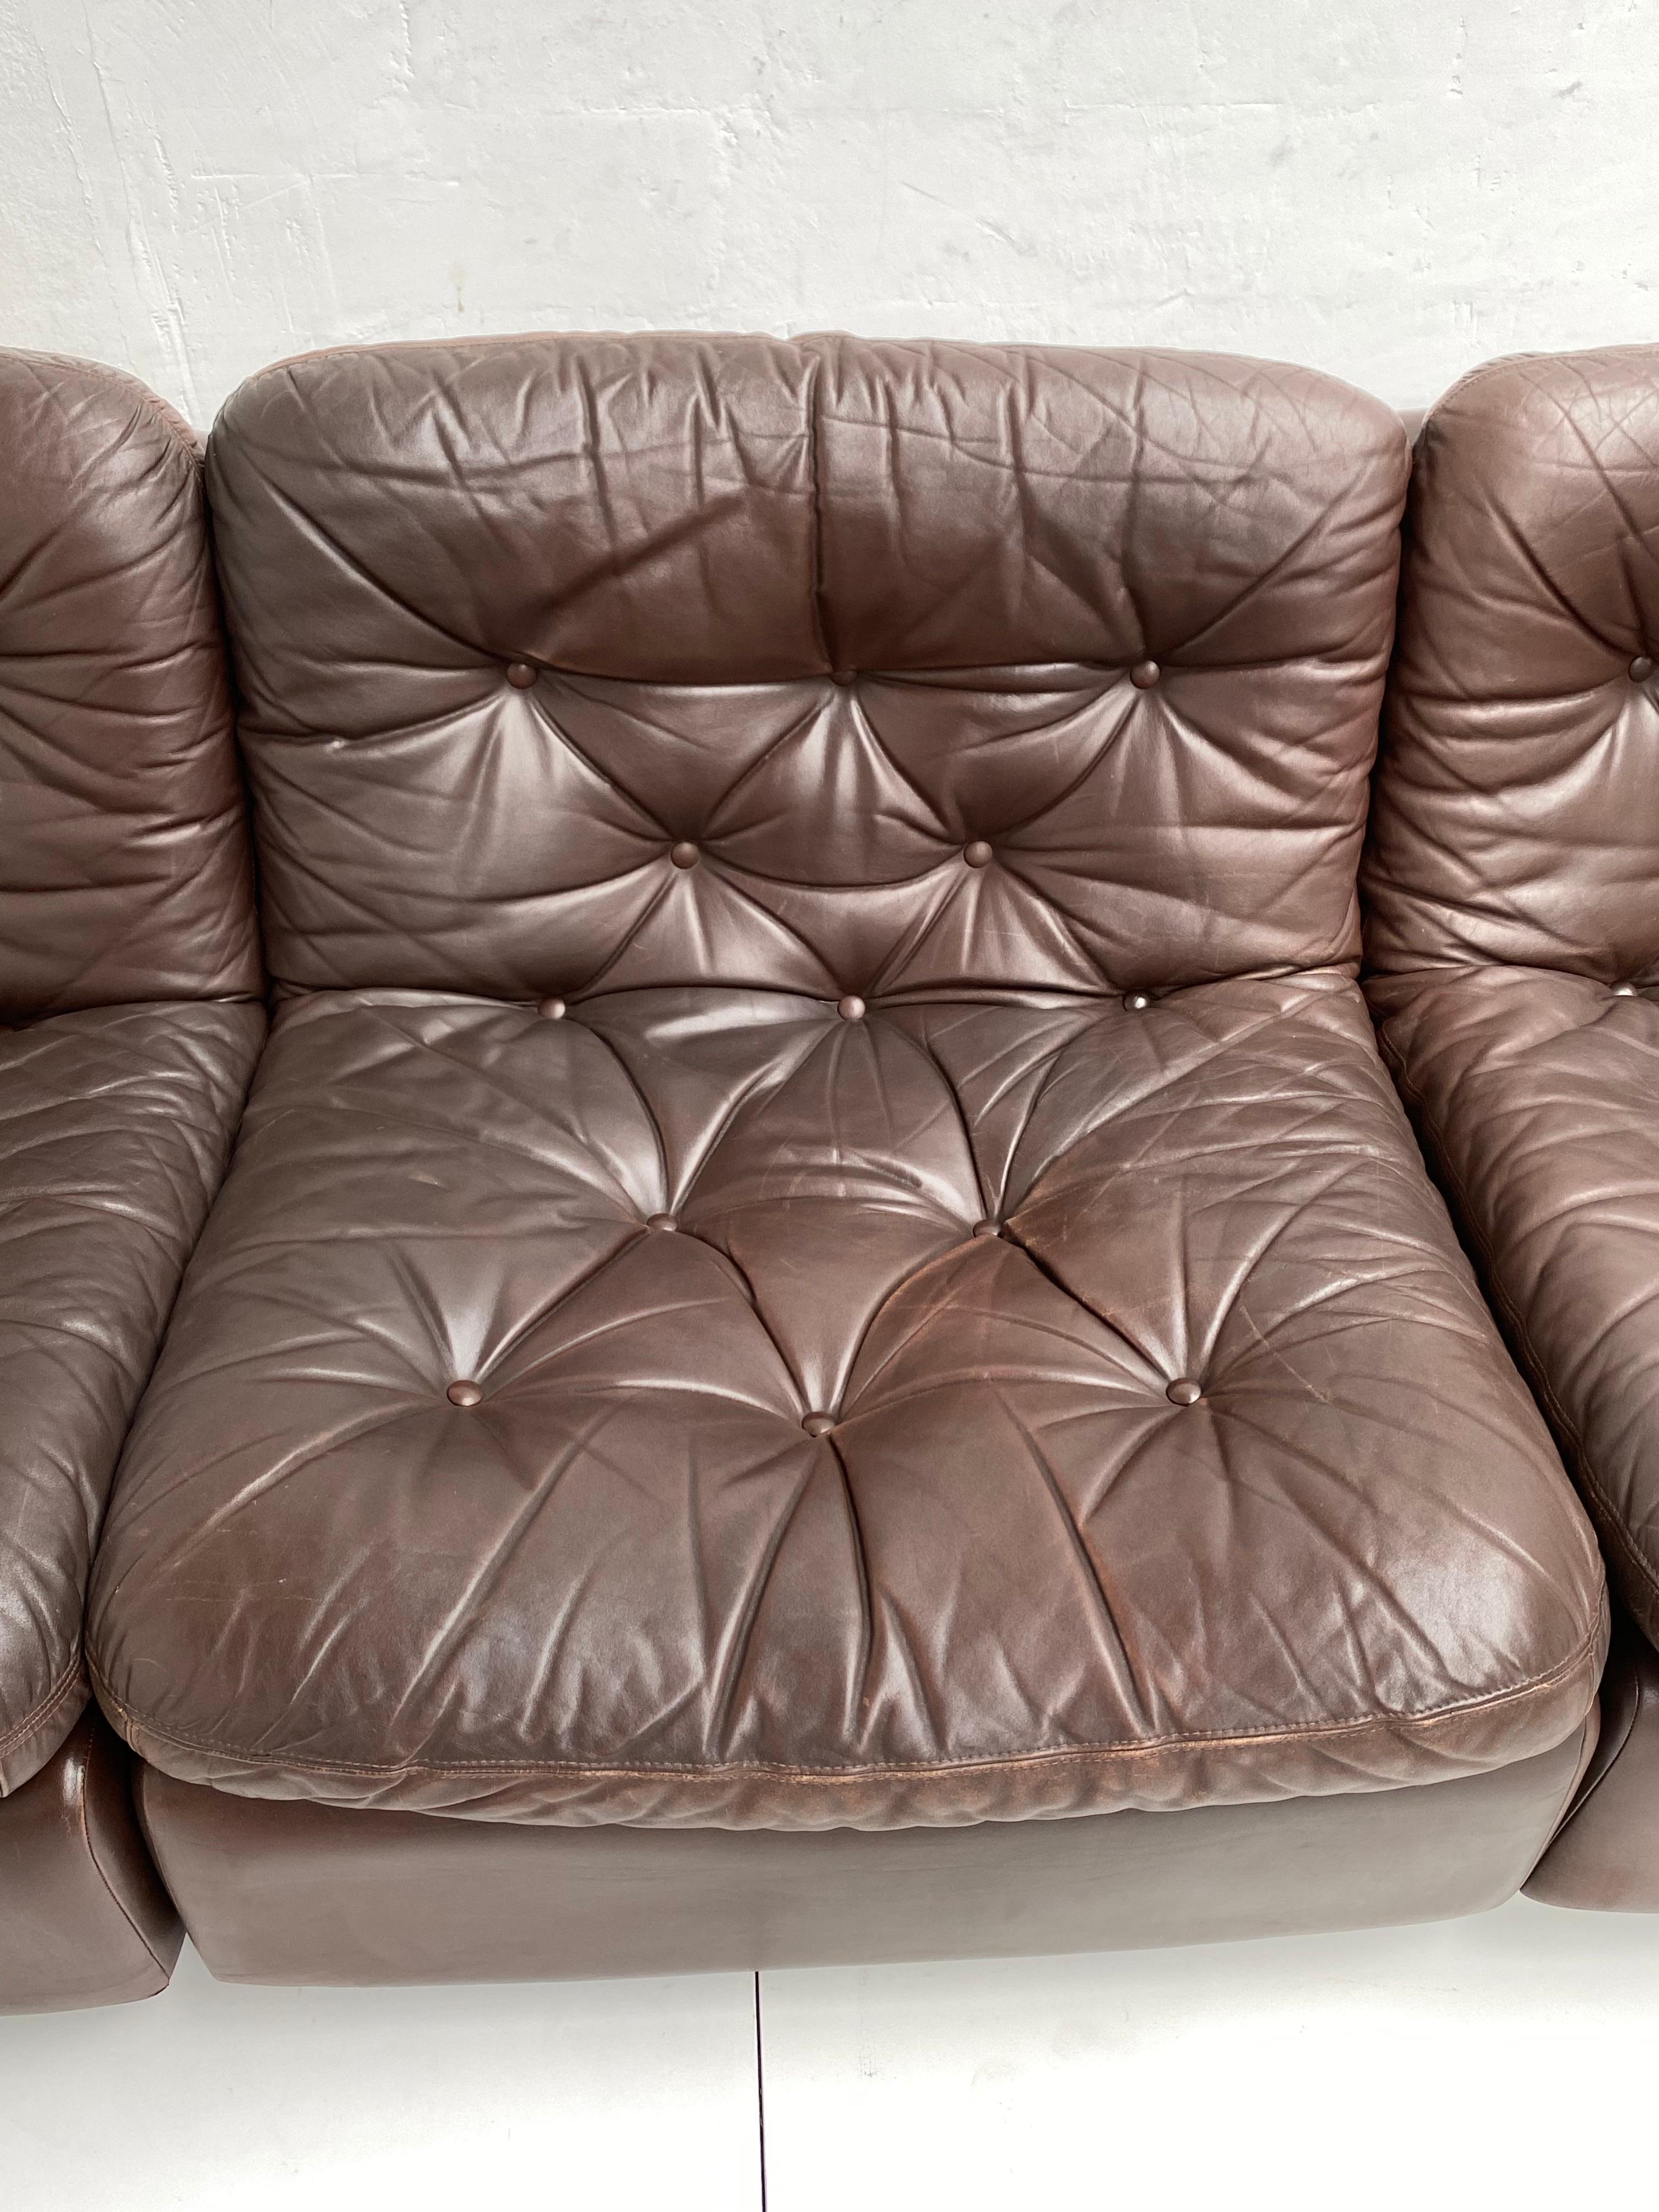 Chocolate Brown Leather 5-Piece Modular Seating System, COR Germany, 1970s 1